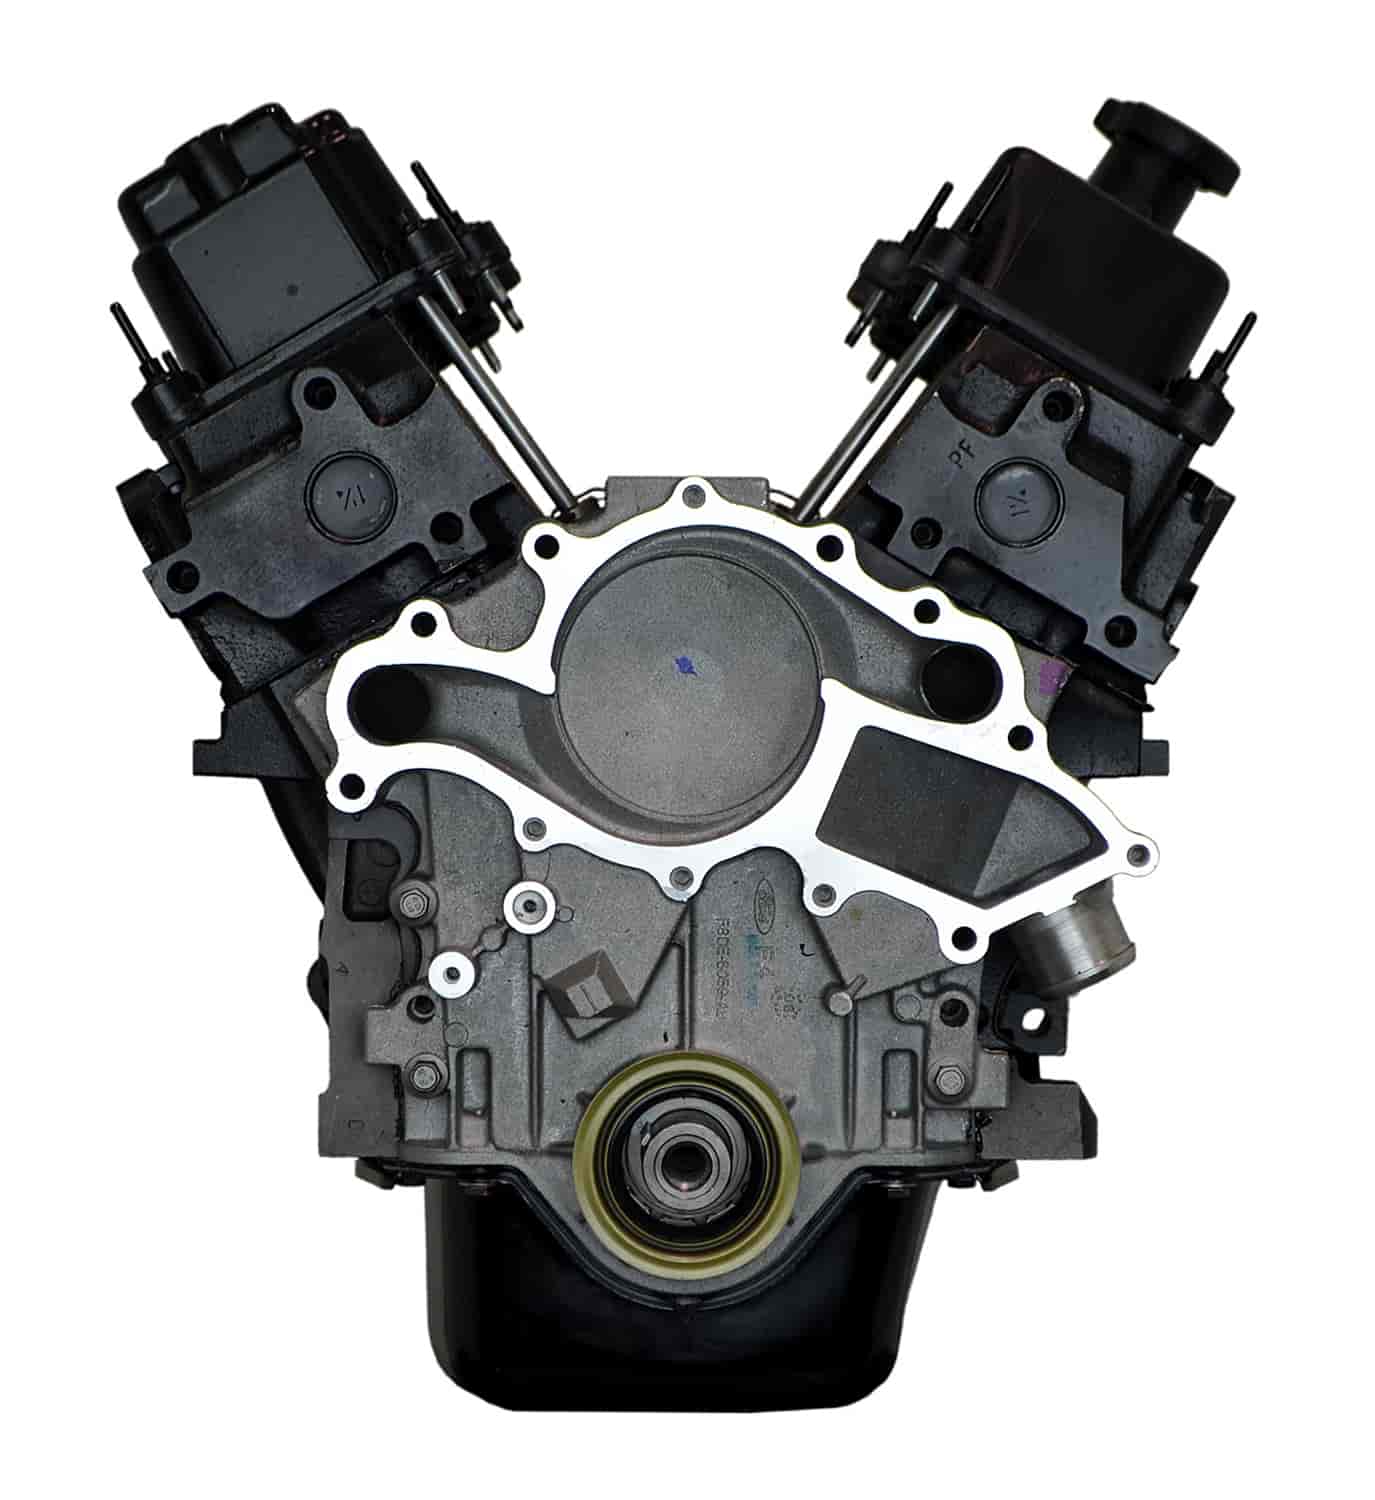 Remanufactured Crate Engine for 2002-2008 Ford Ranger with 3.0L V6